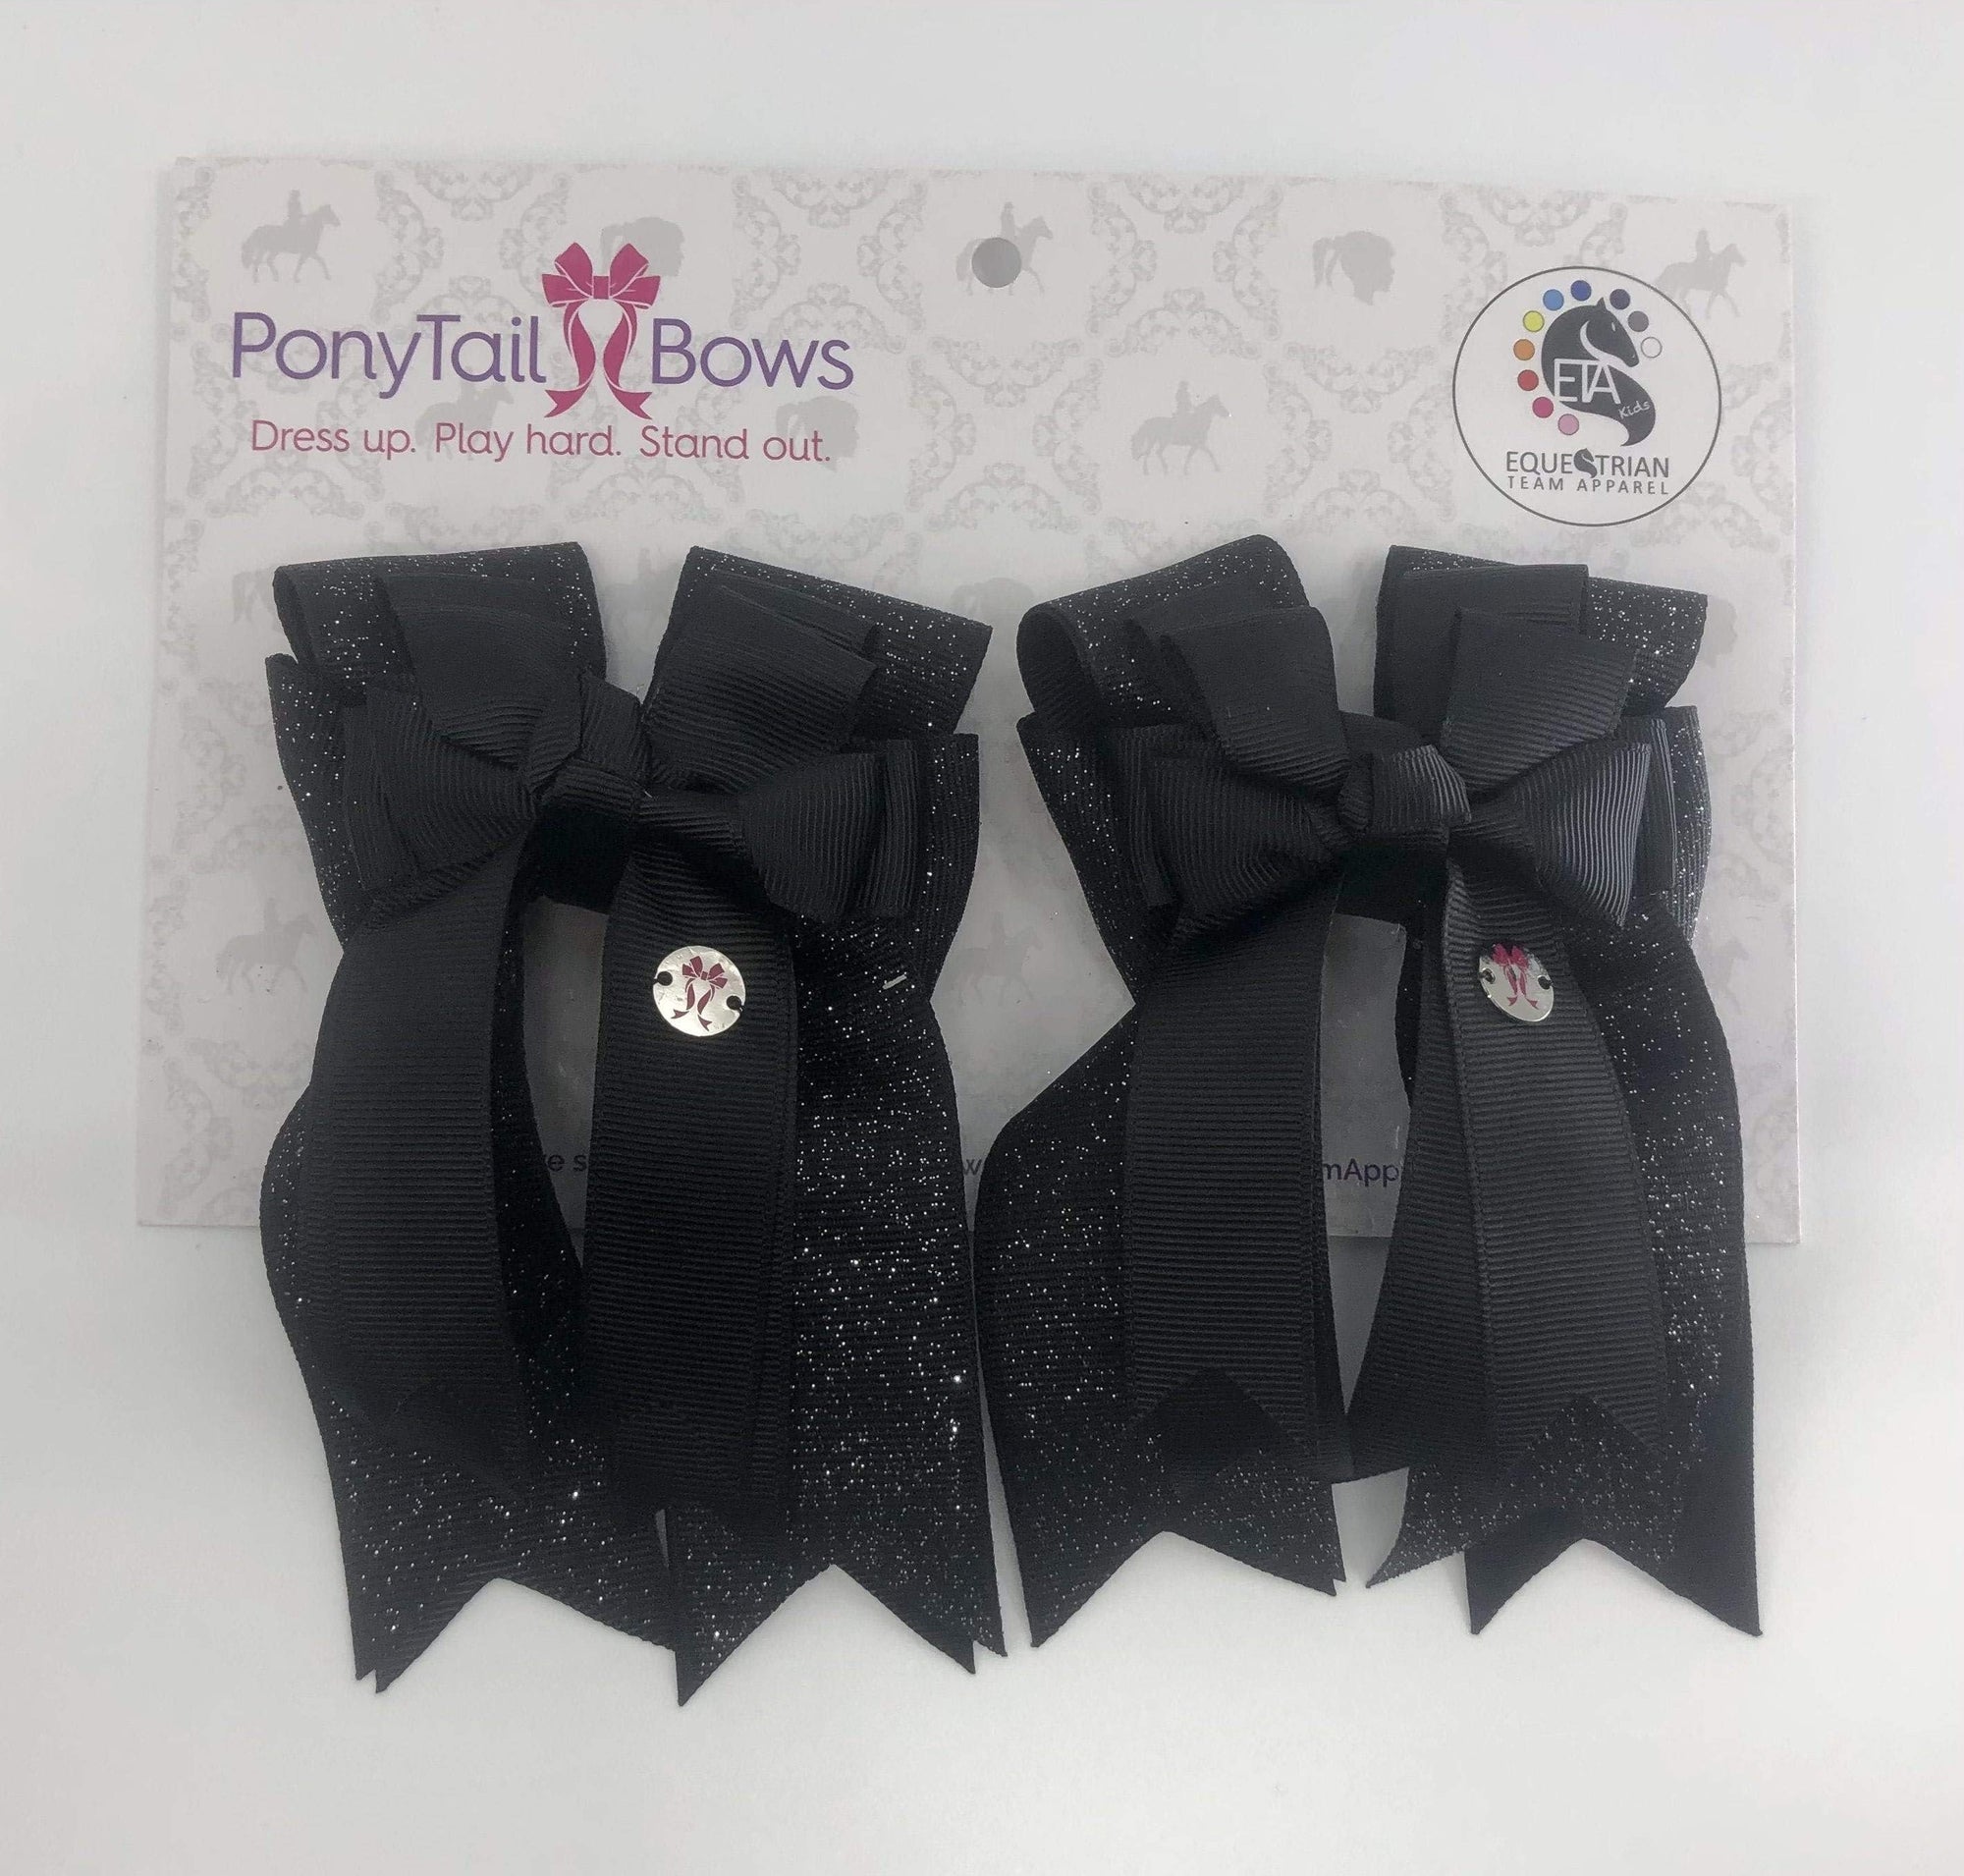 PonyTail Bows 3" Tails Black Solid PonyTail Bows equestrian team apparel online tack store mobile tack store custom farm apparel custom show stable clothing equestrian lifestyle horse show clothing riding clothes Abbie Horse Show Bows | PonyTail Bows | Equestrian Hair Accessories horses equestrian tack store